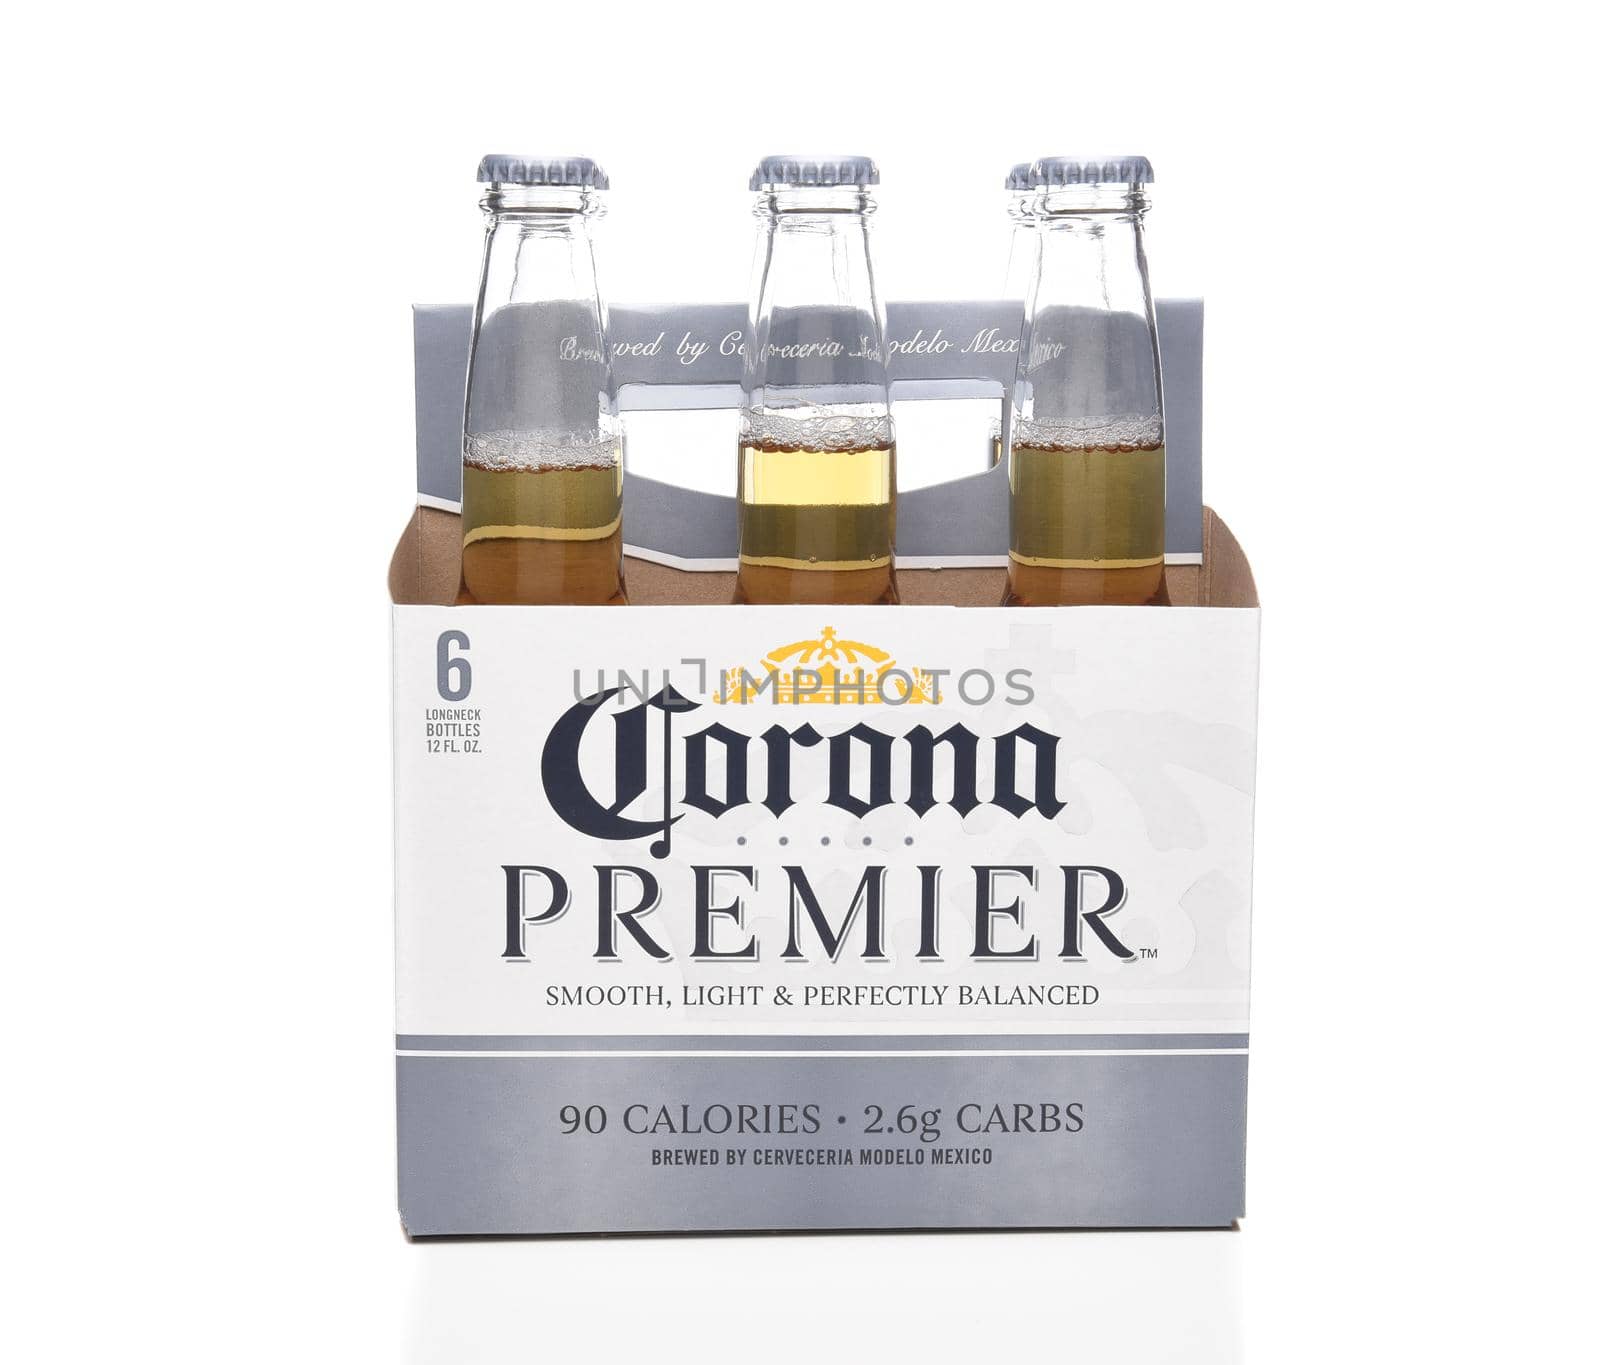 IRVINE, CALIFORNIA - MARCH 21, 2018: 6 pack of Corona Premier side view. Corona Premier is premium light beer with 2.6 grams of carbs and 90 calories.